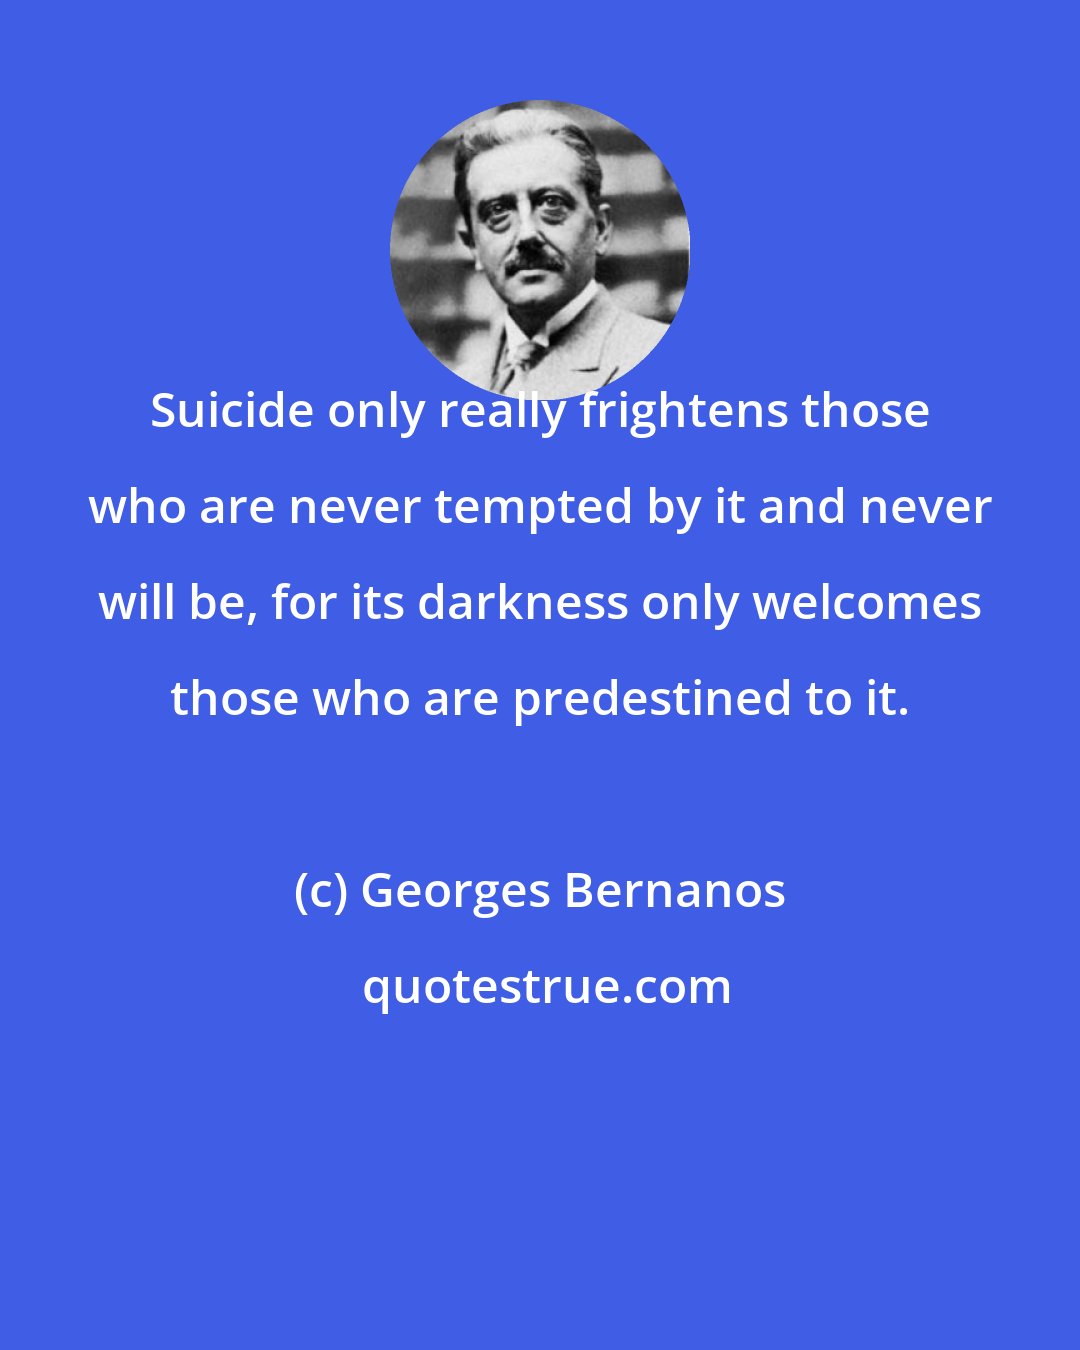 Georges Bernanos: Suicide only really frightens those who are never tempted by it and never will be, for its darkness only welcomes those who are predestined to it.